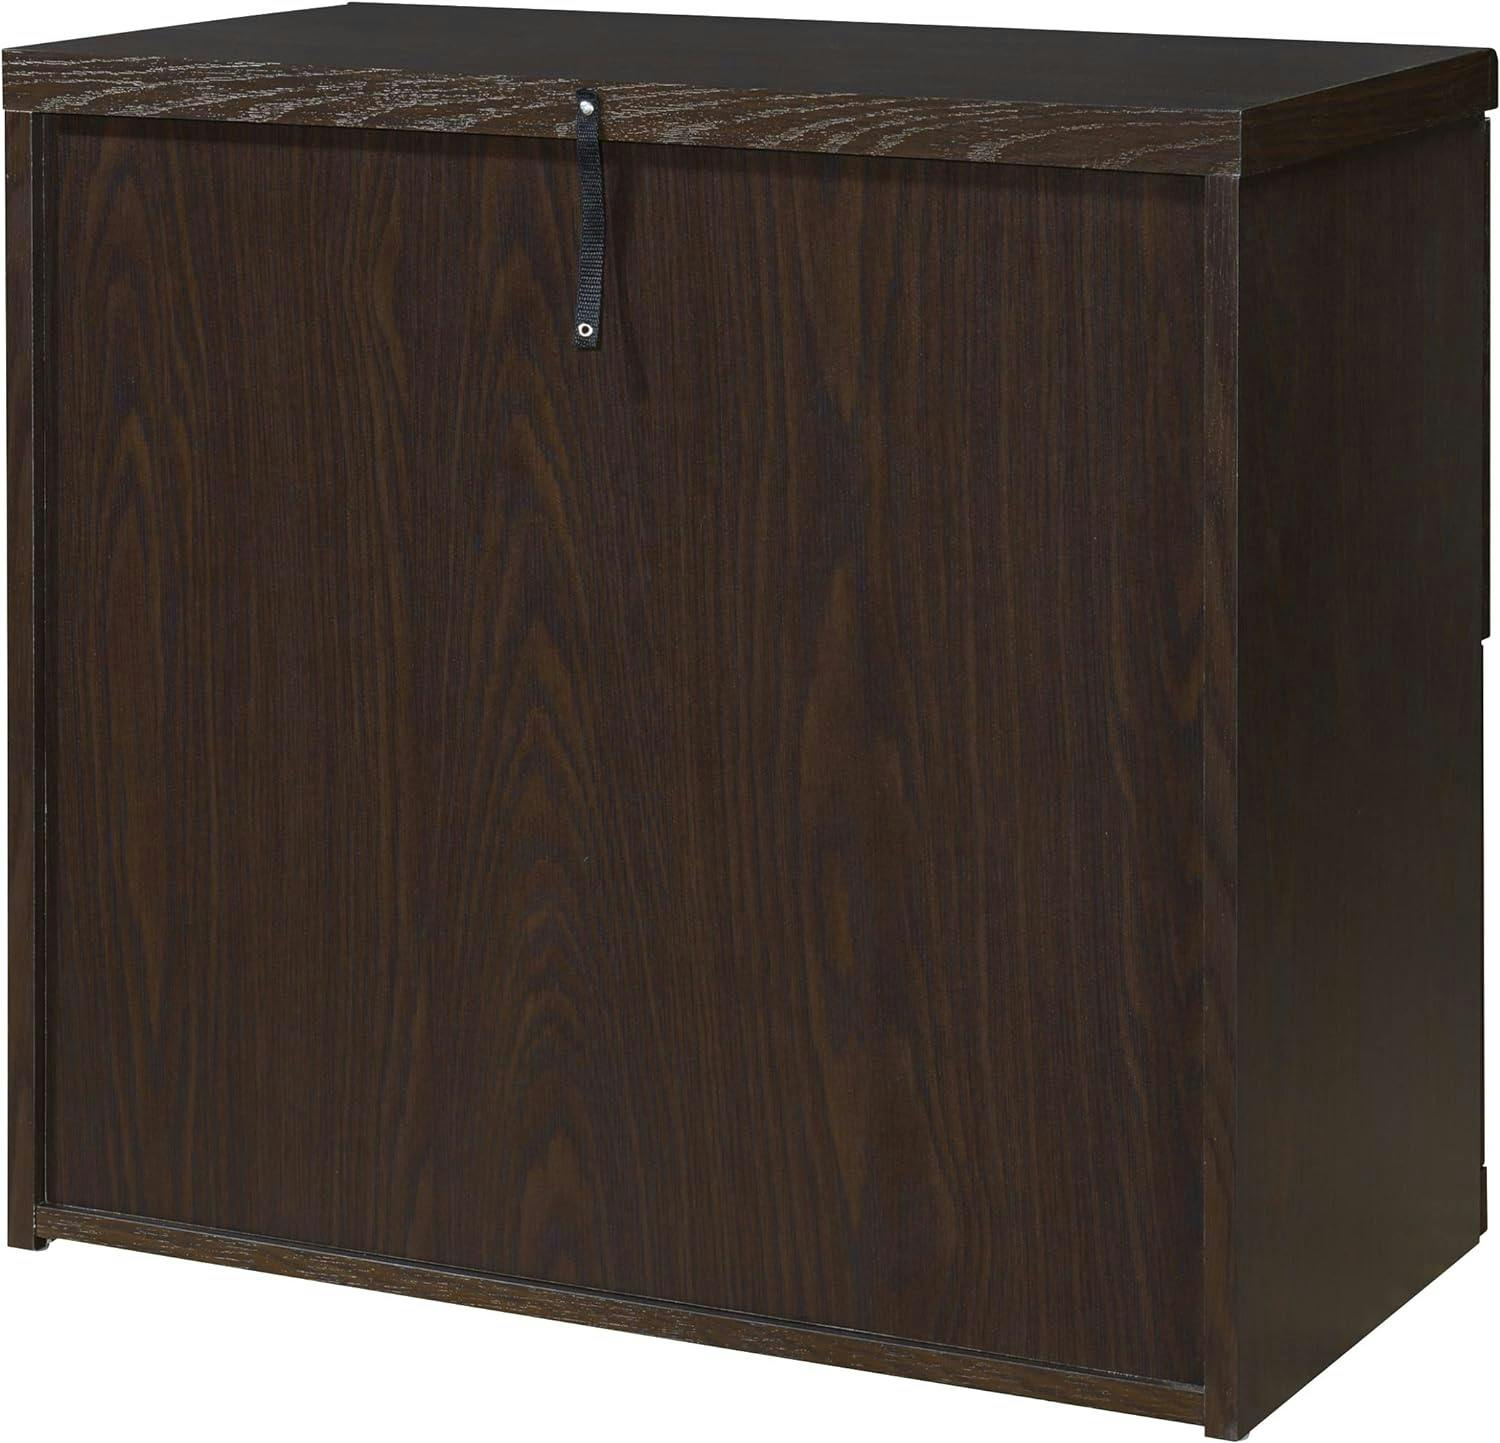 Espresso Finish Wood Lateral 2-Drawer Legal/Letter File Cabinet with Lock